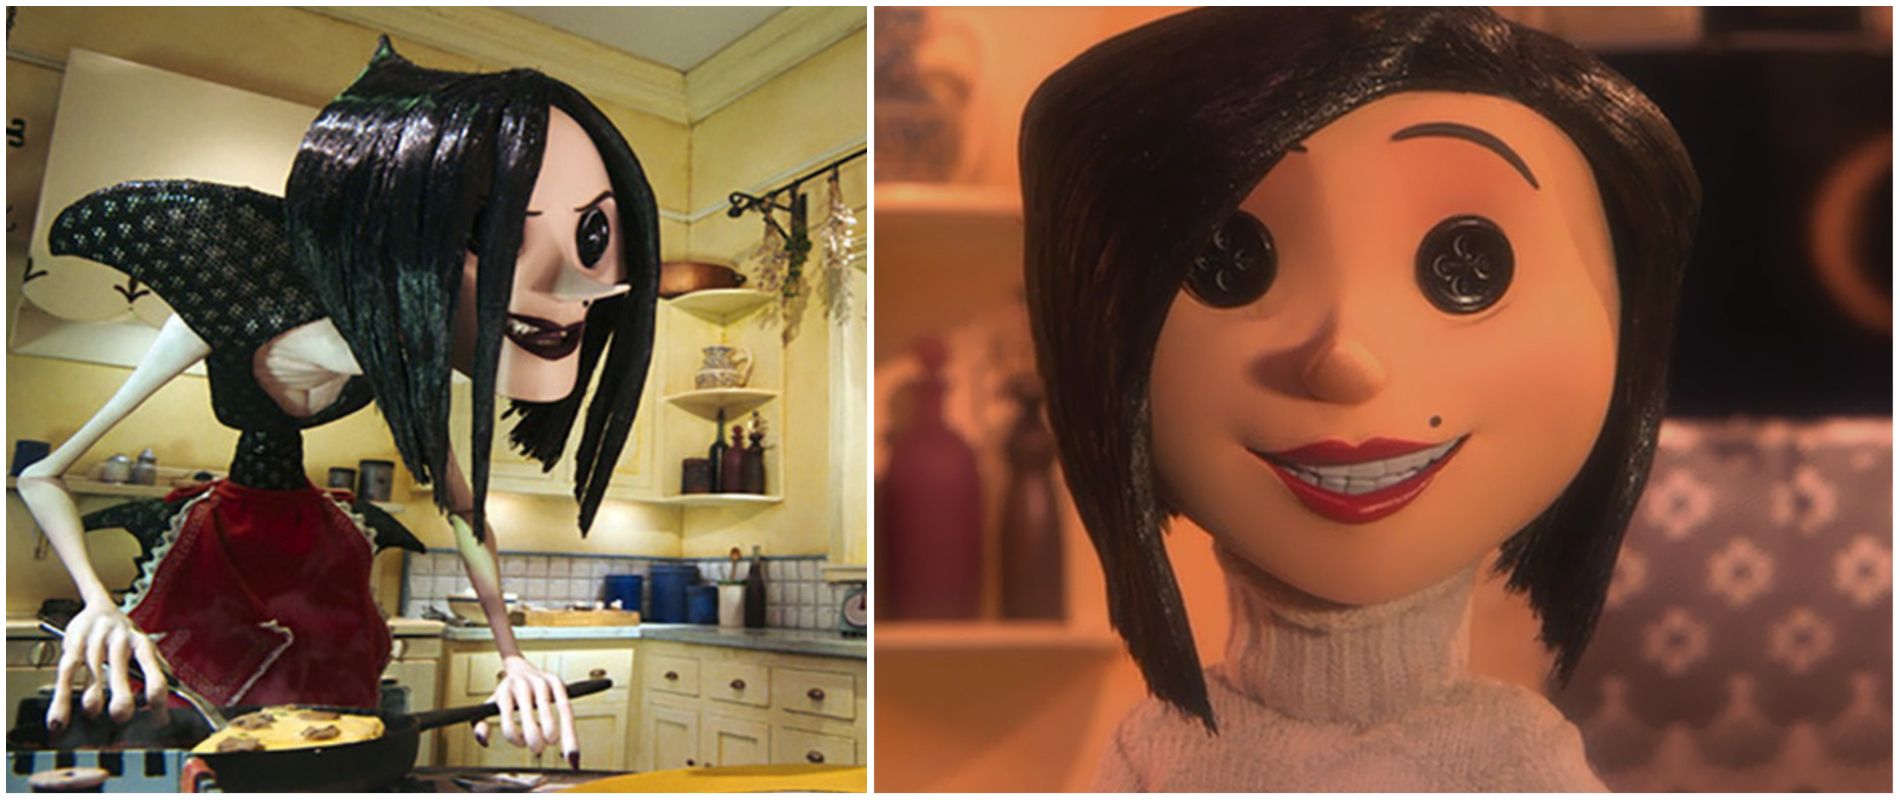 Images from Coraline of The Beldam